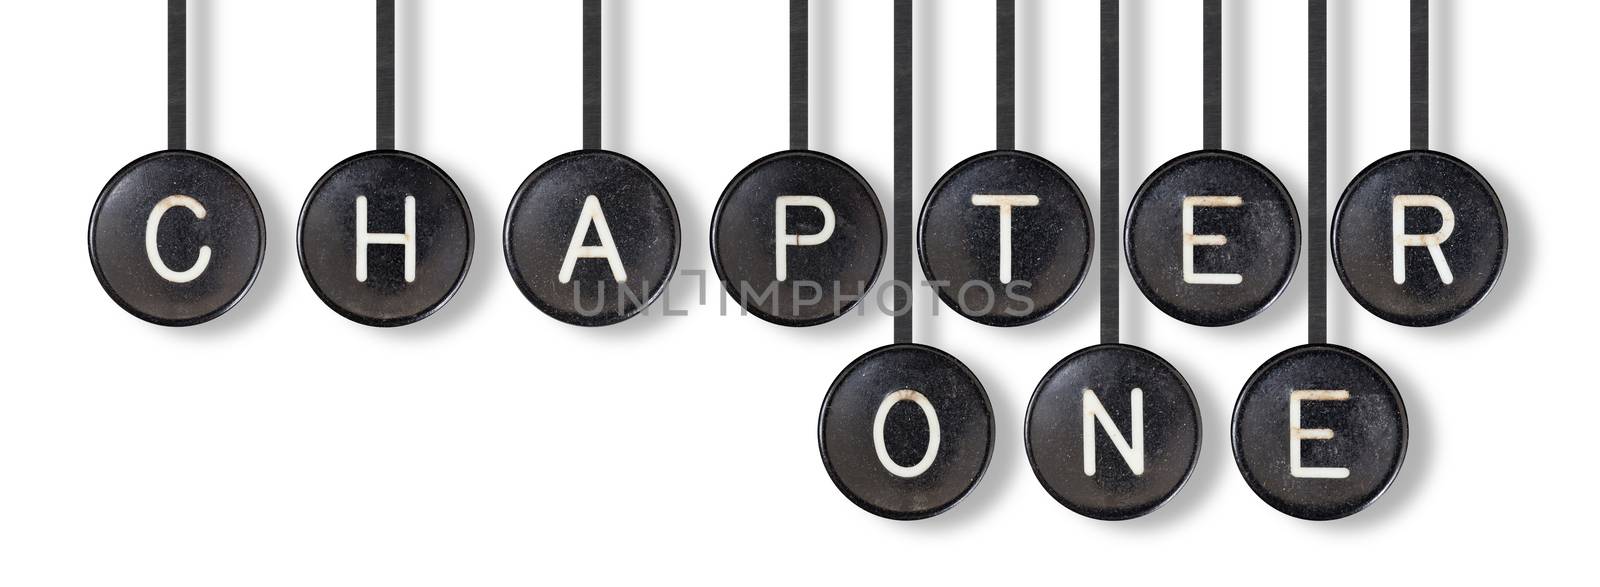 Typewriter buttons, isolated on white background - Chapter one